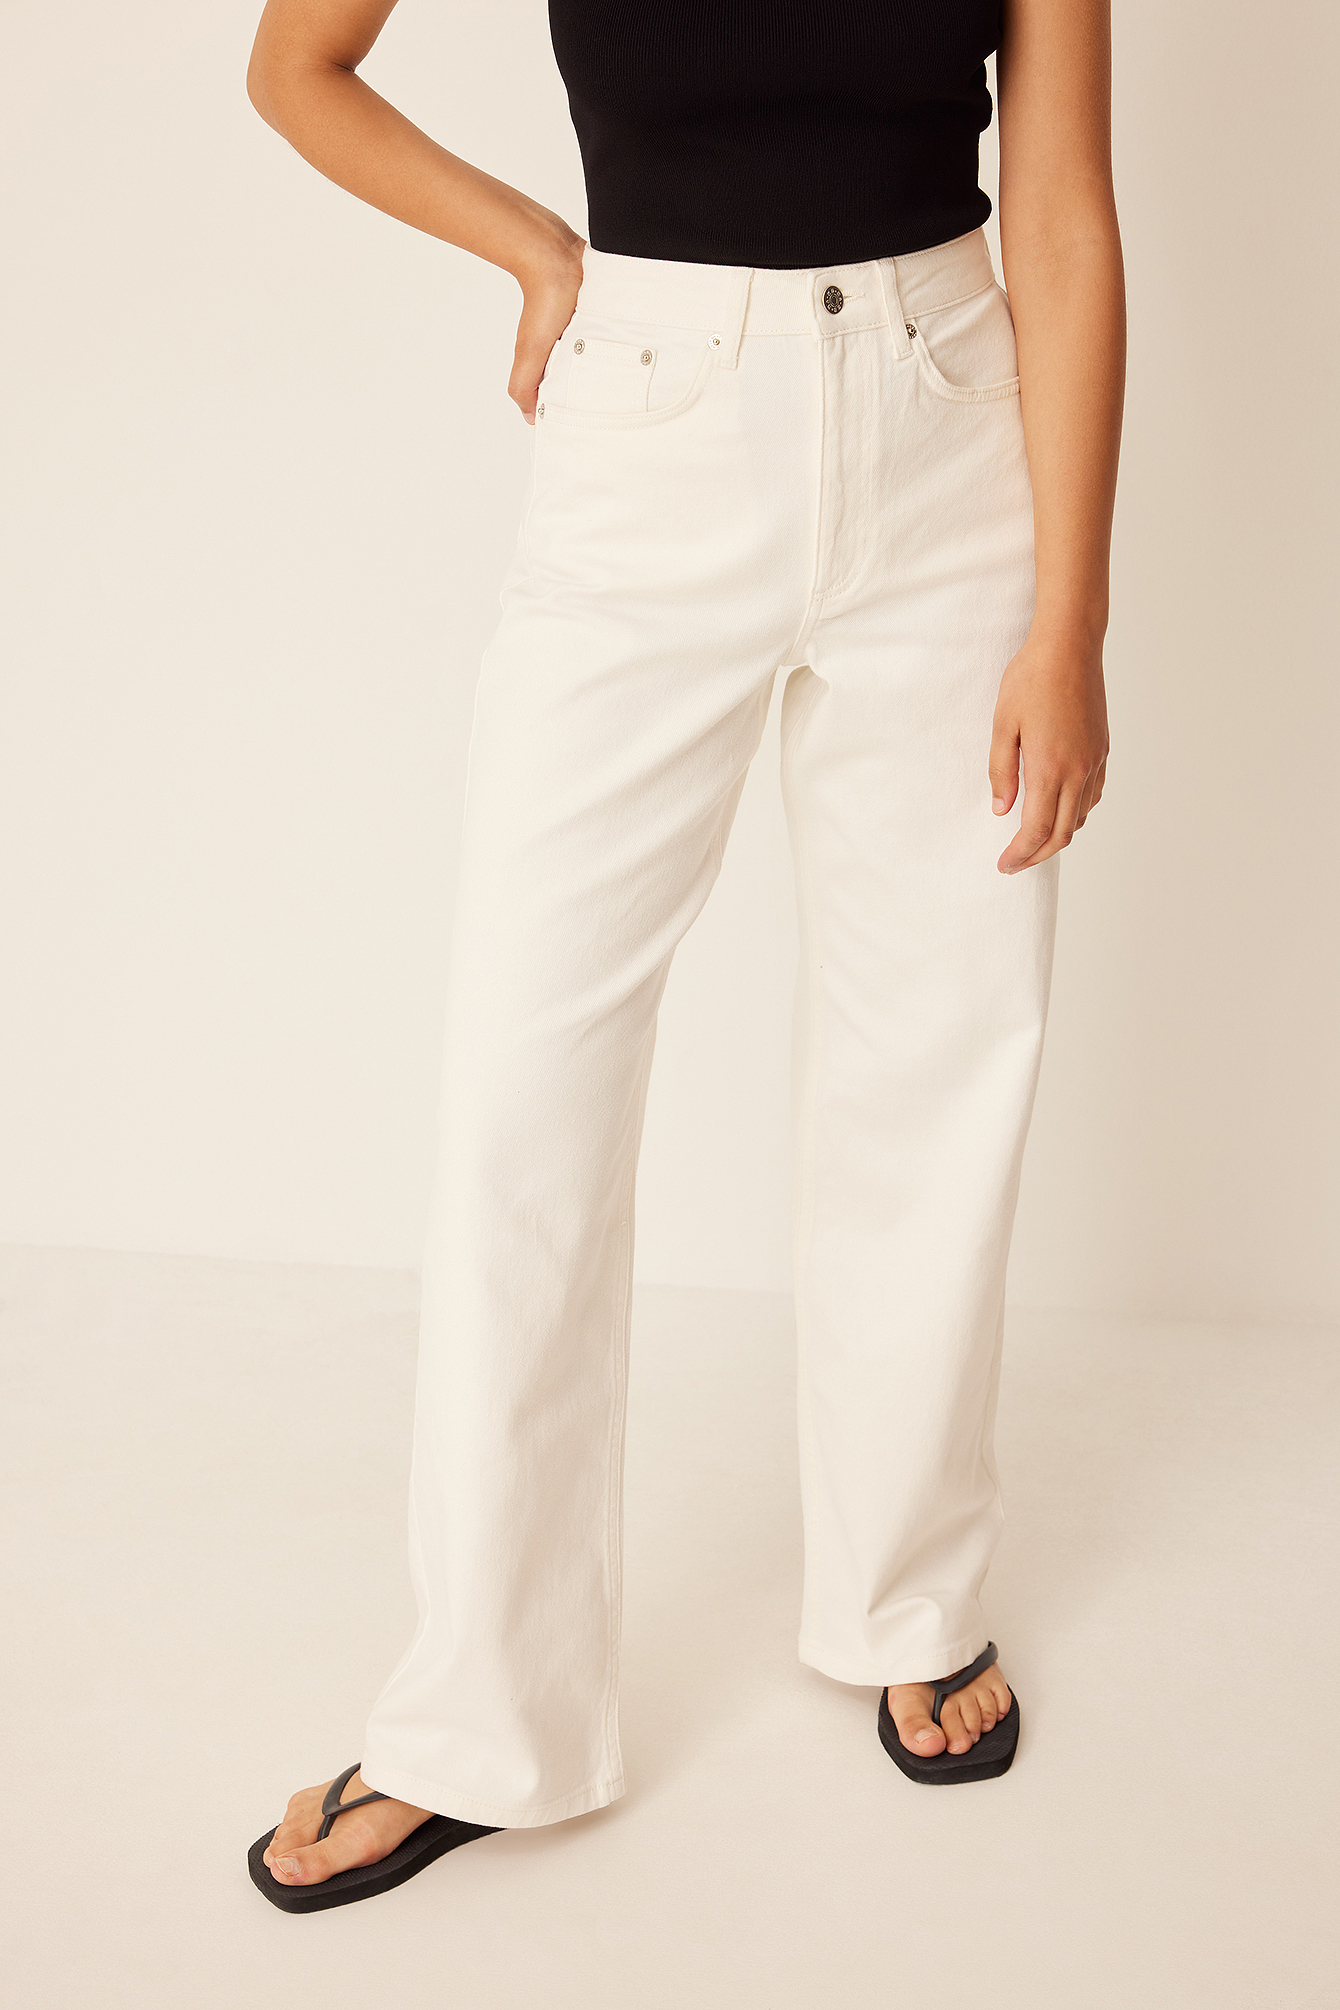 Seconds White Lined Belted Straight Leg Trousers with Pockets Casual Summer 